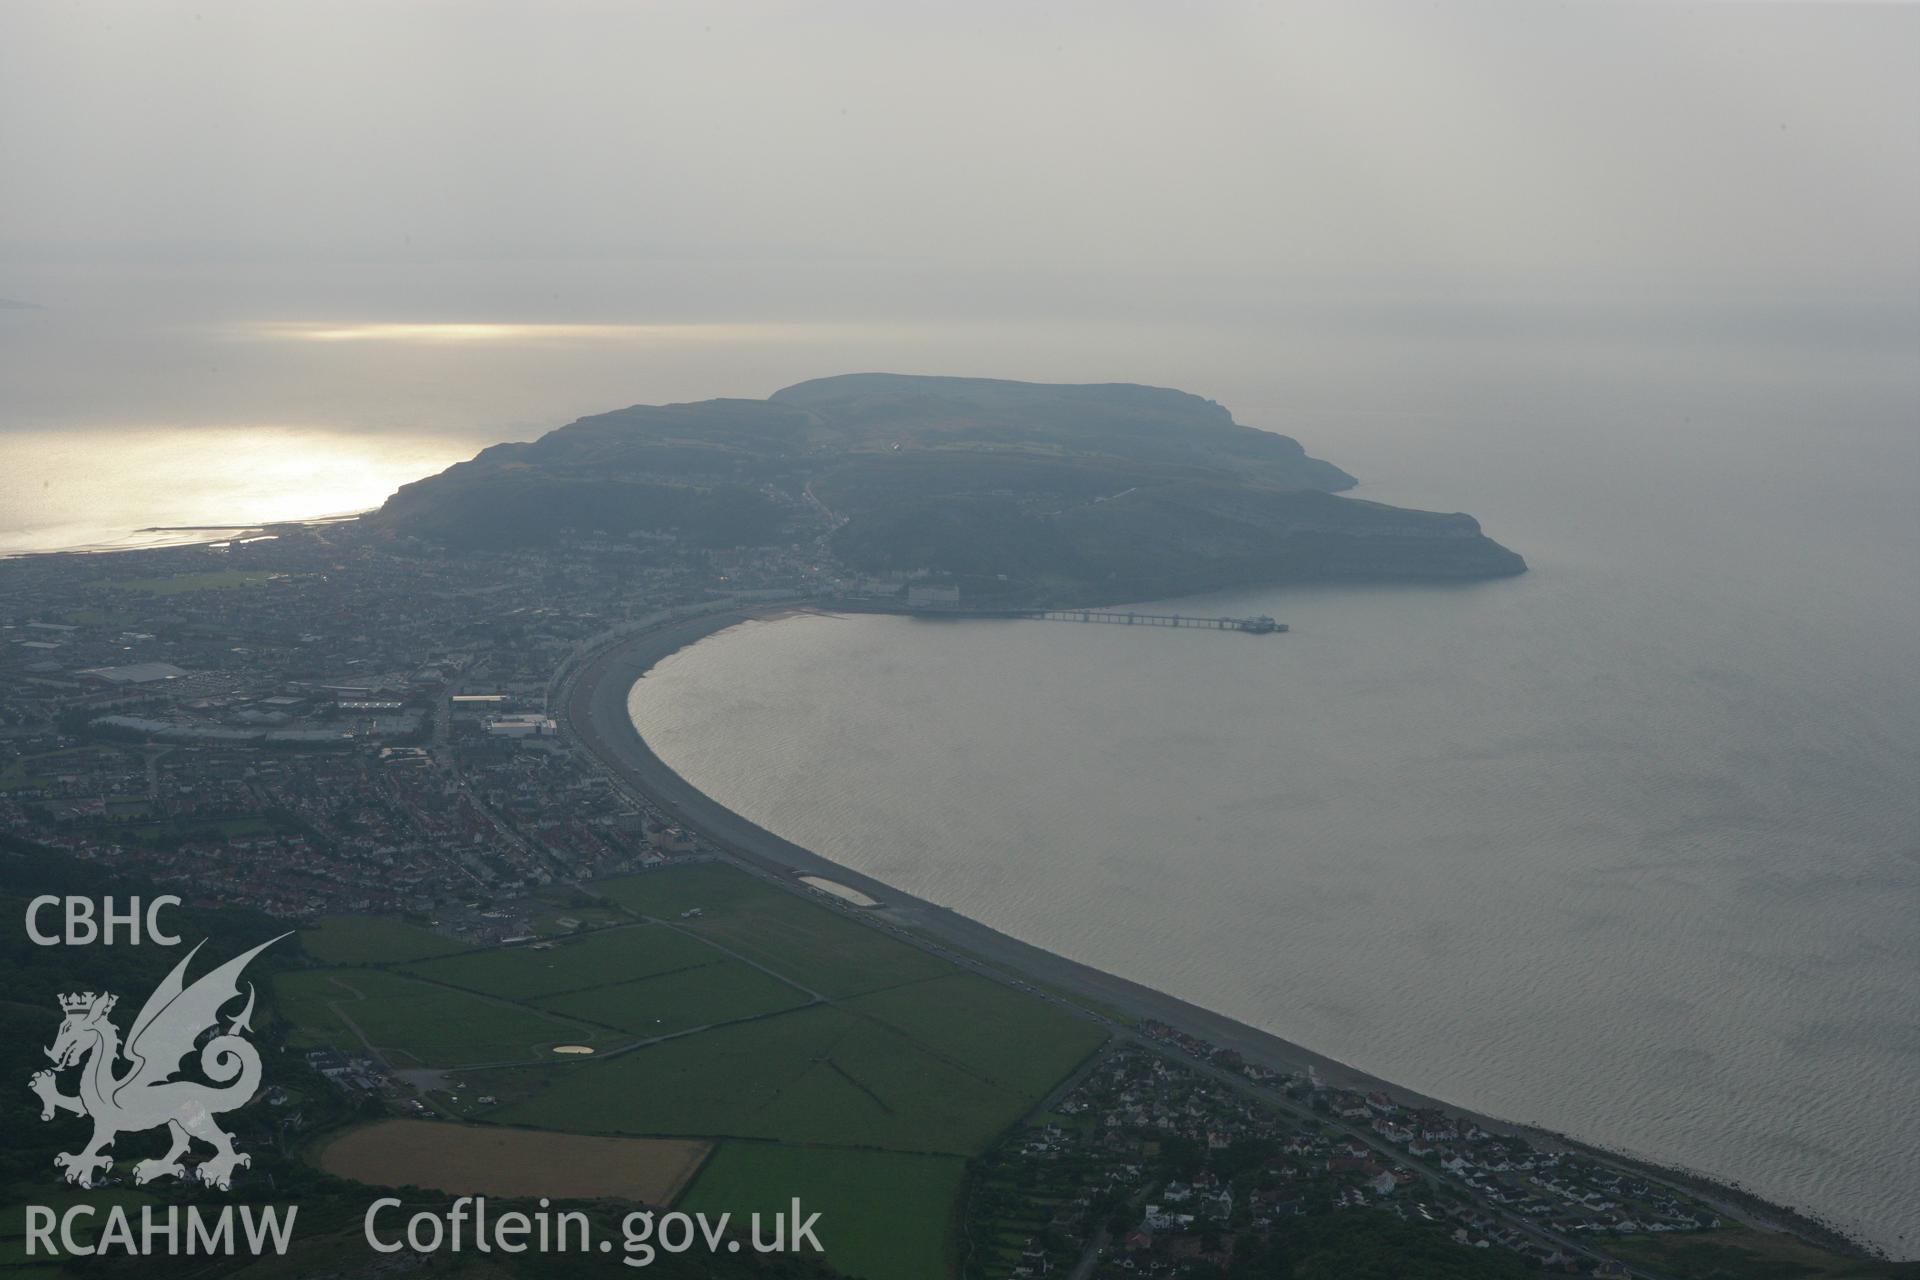 RCAHMW colour oblique photograph of Llandudno and Great Orme's Head, with Llandudno Pier, view from the east. Taken by Toby Driver on 24/07/2008.